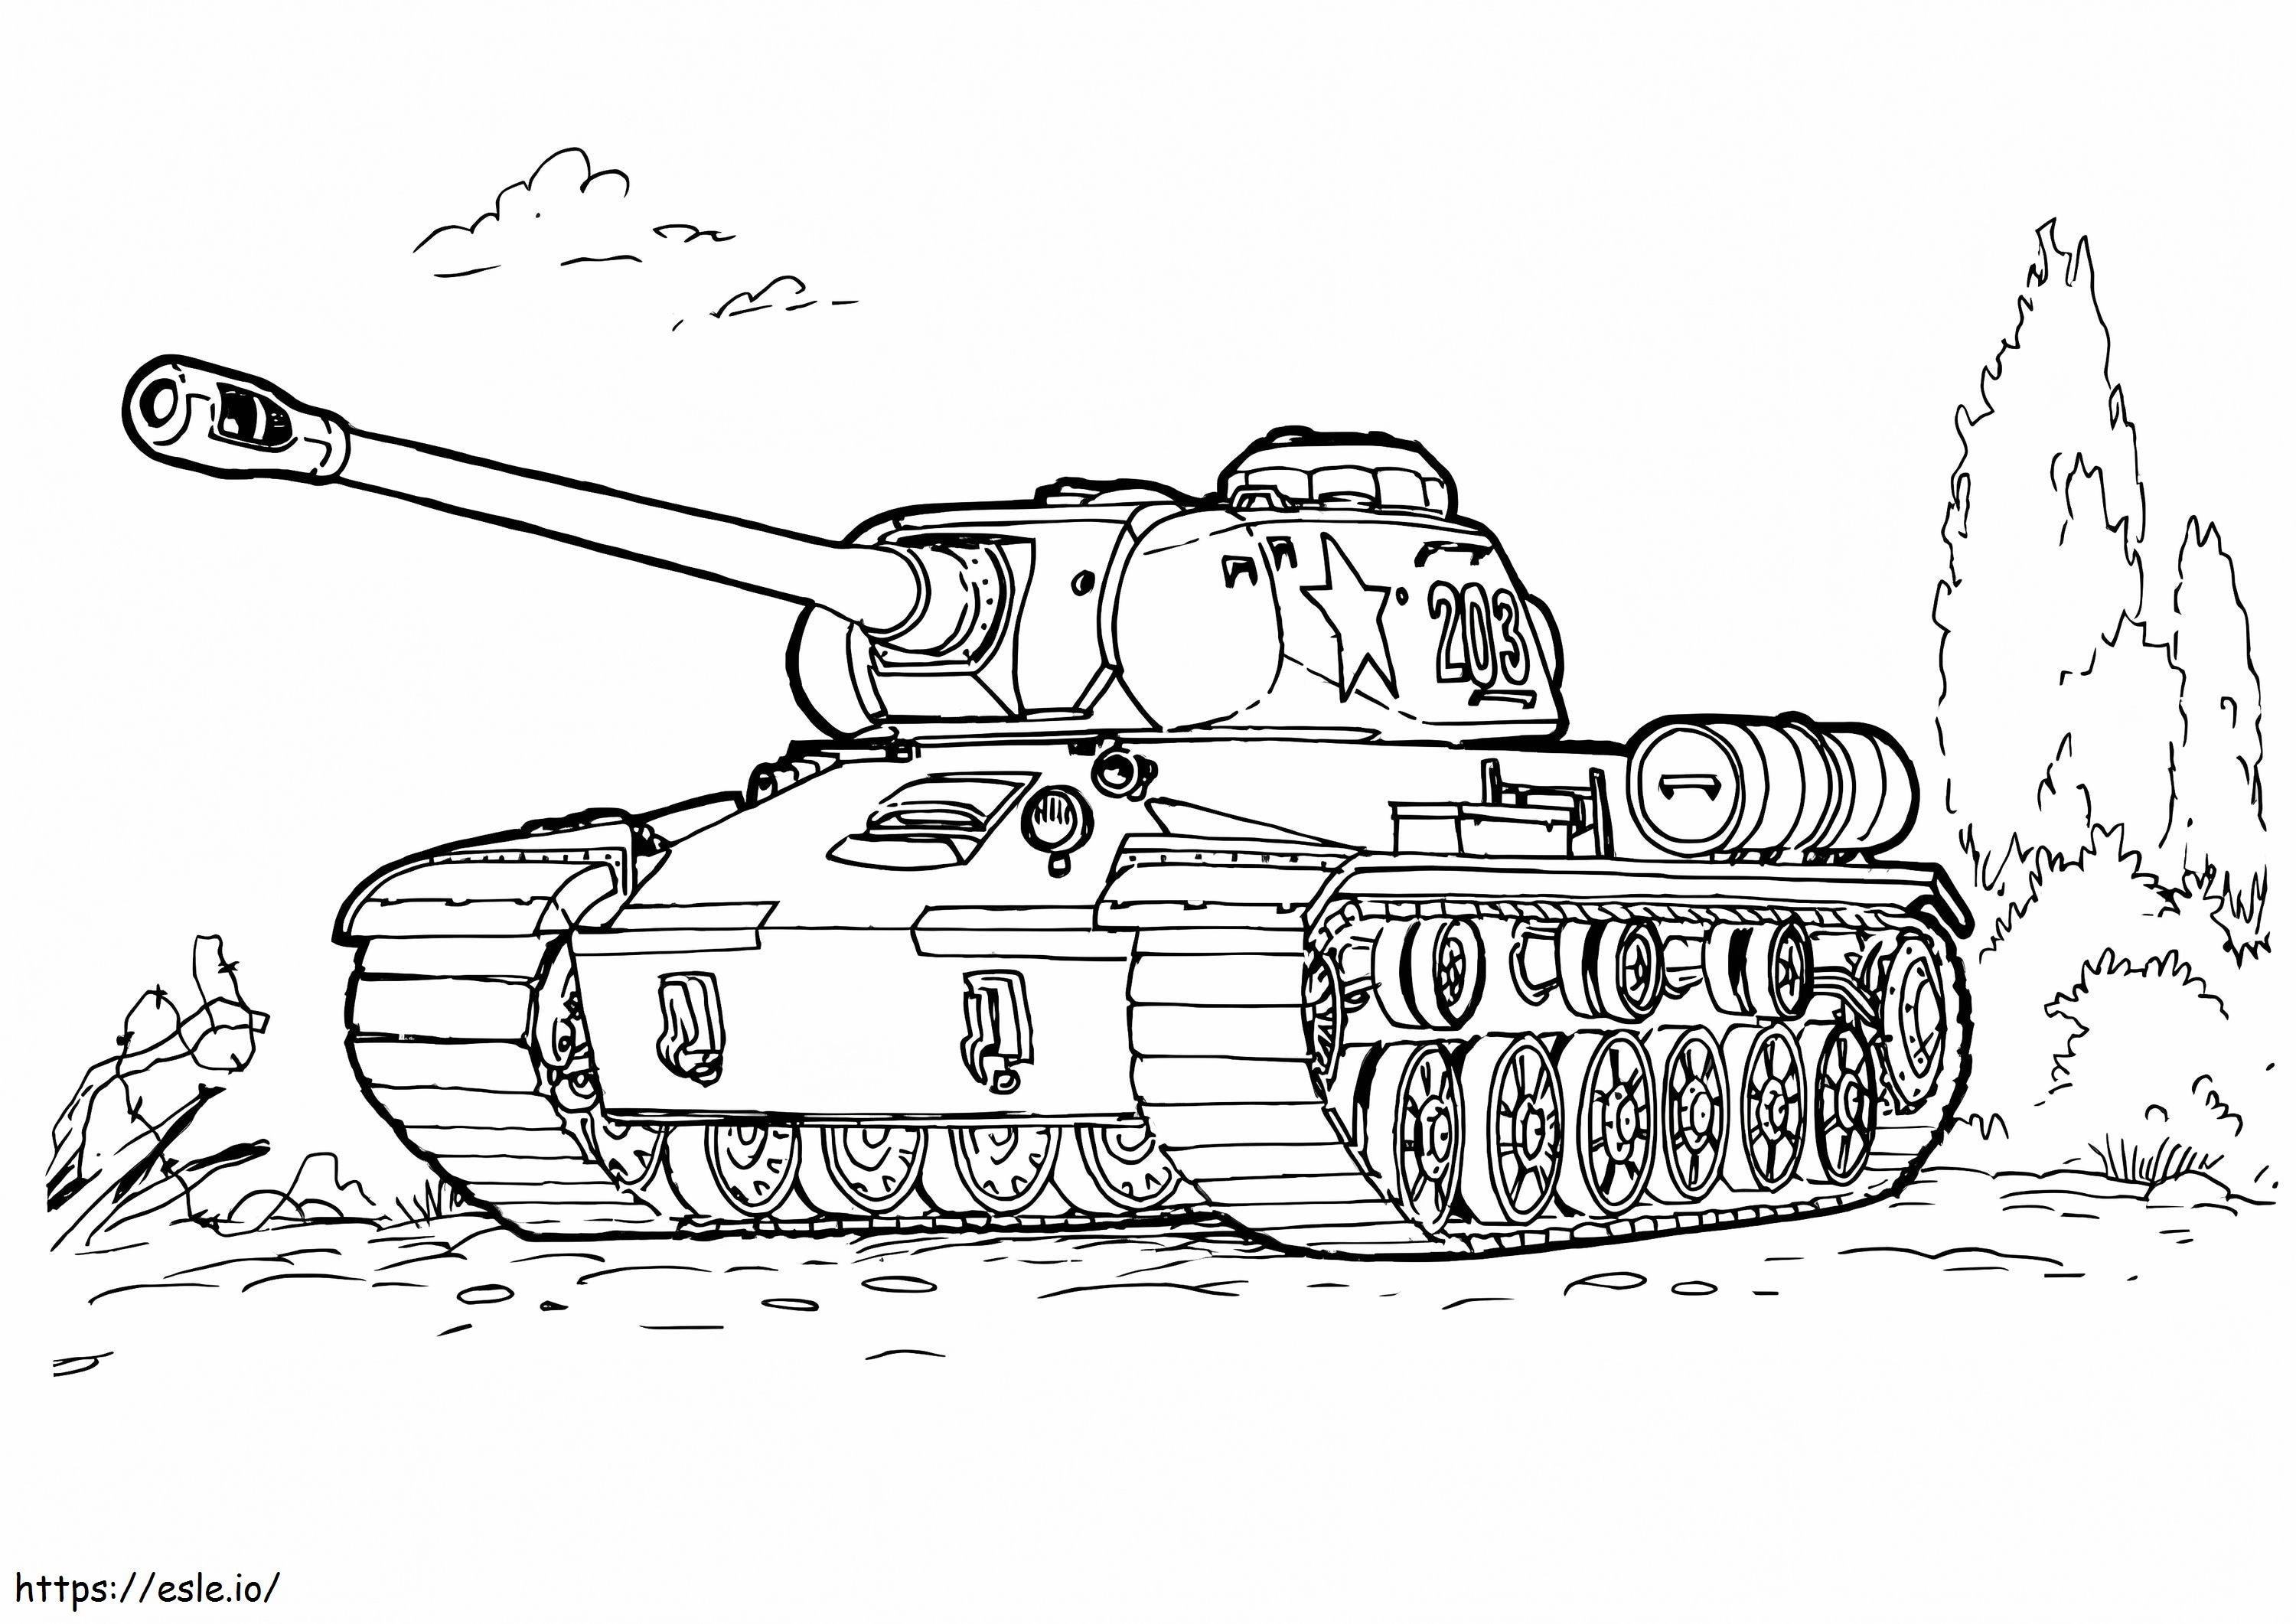 IS 2 Heavy Tank coloring page